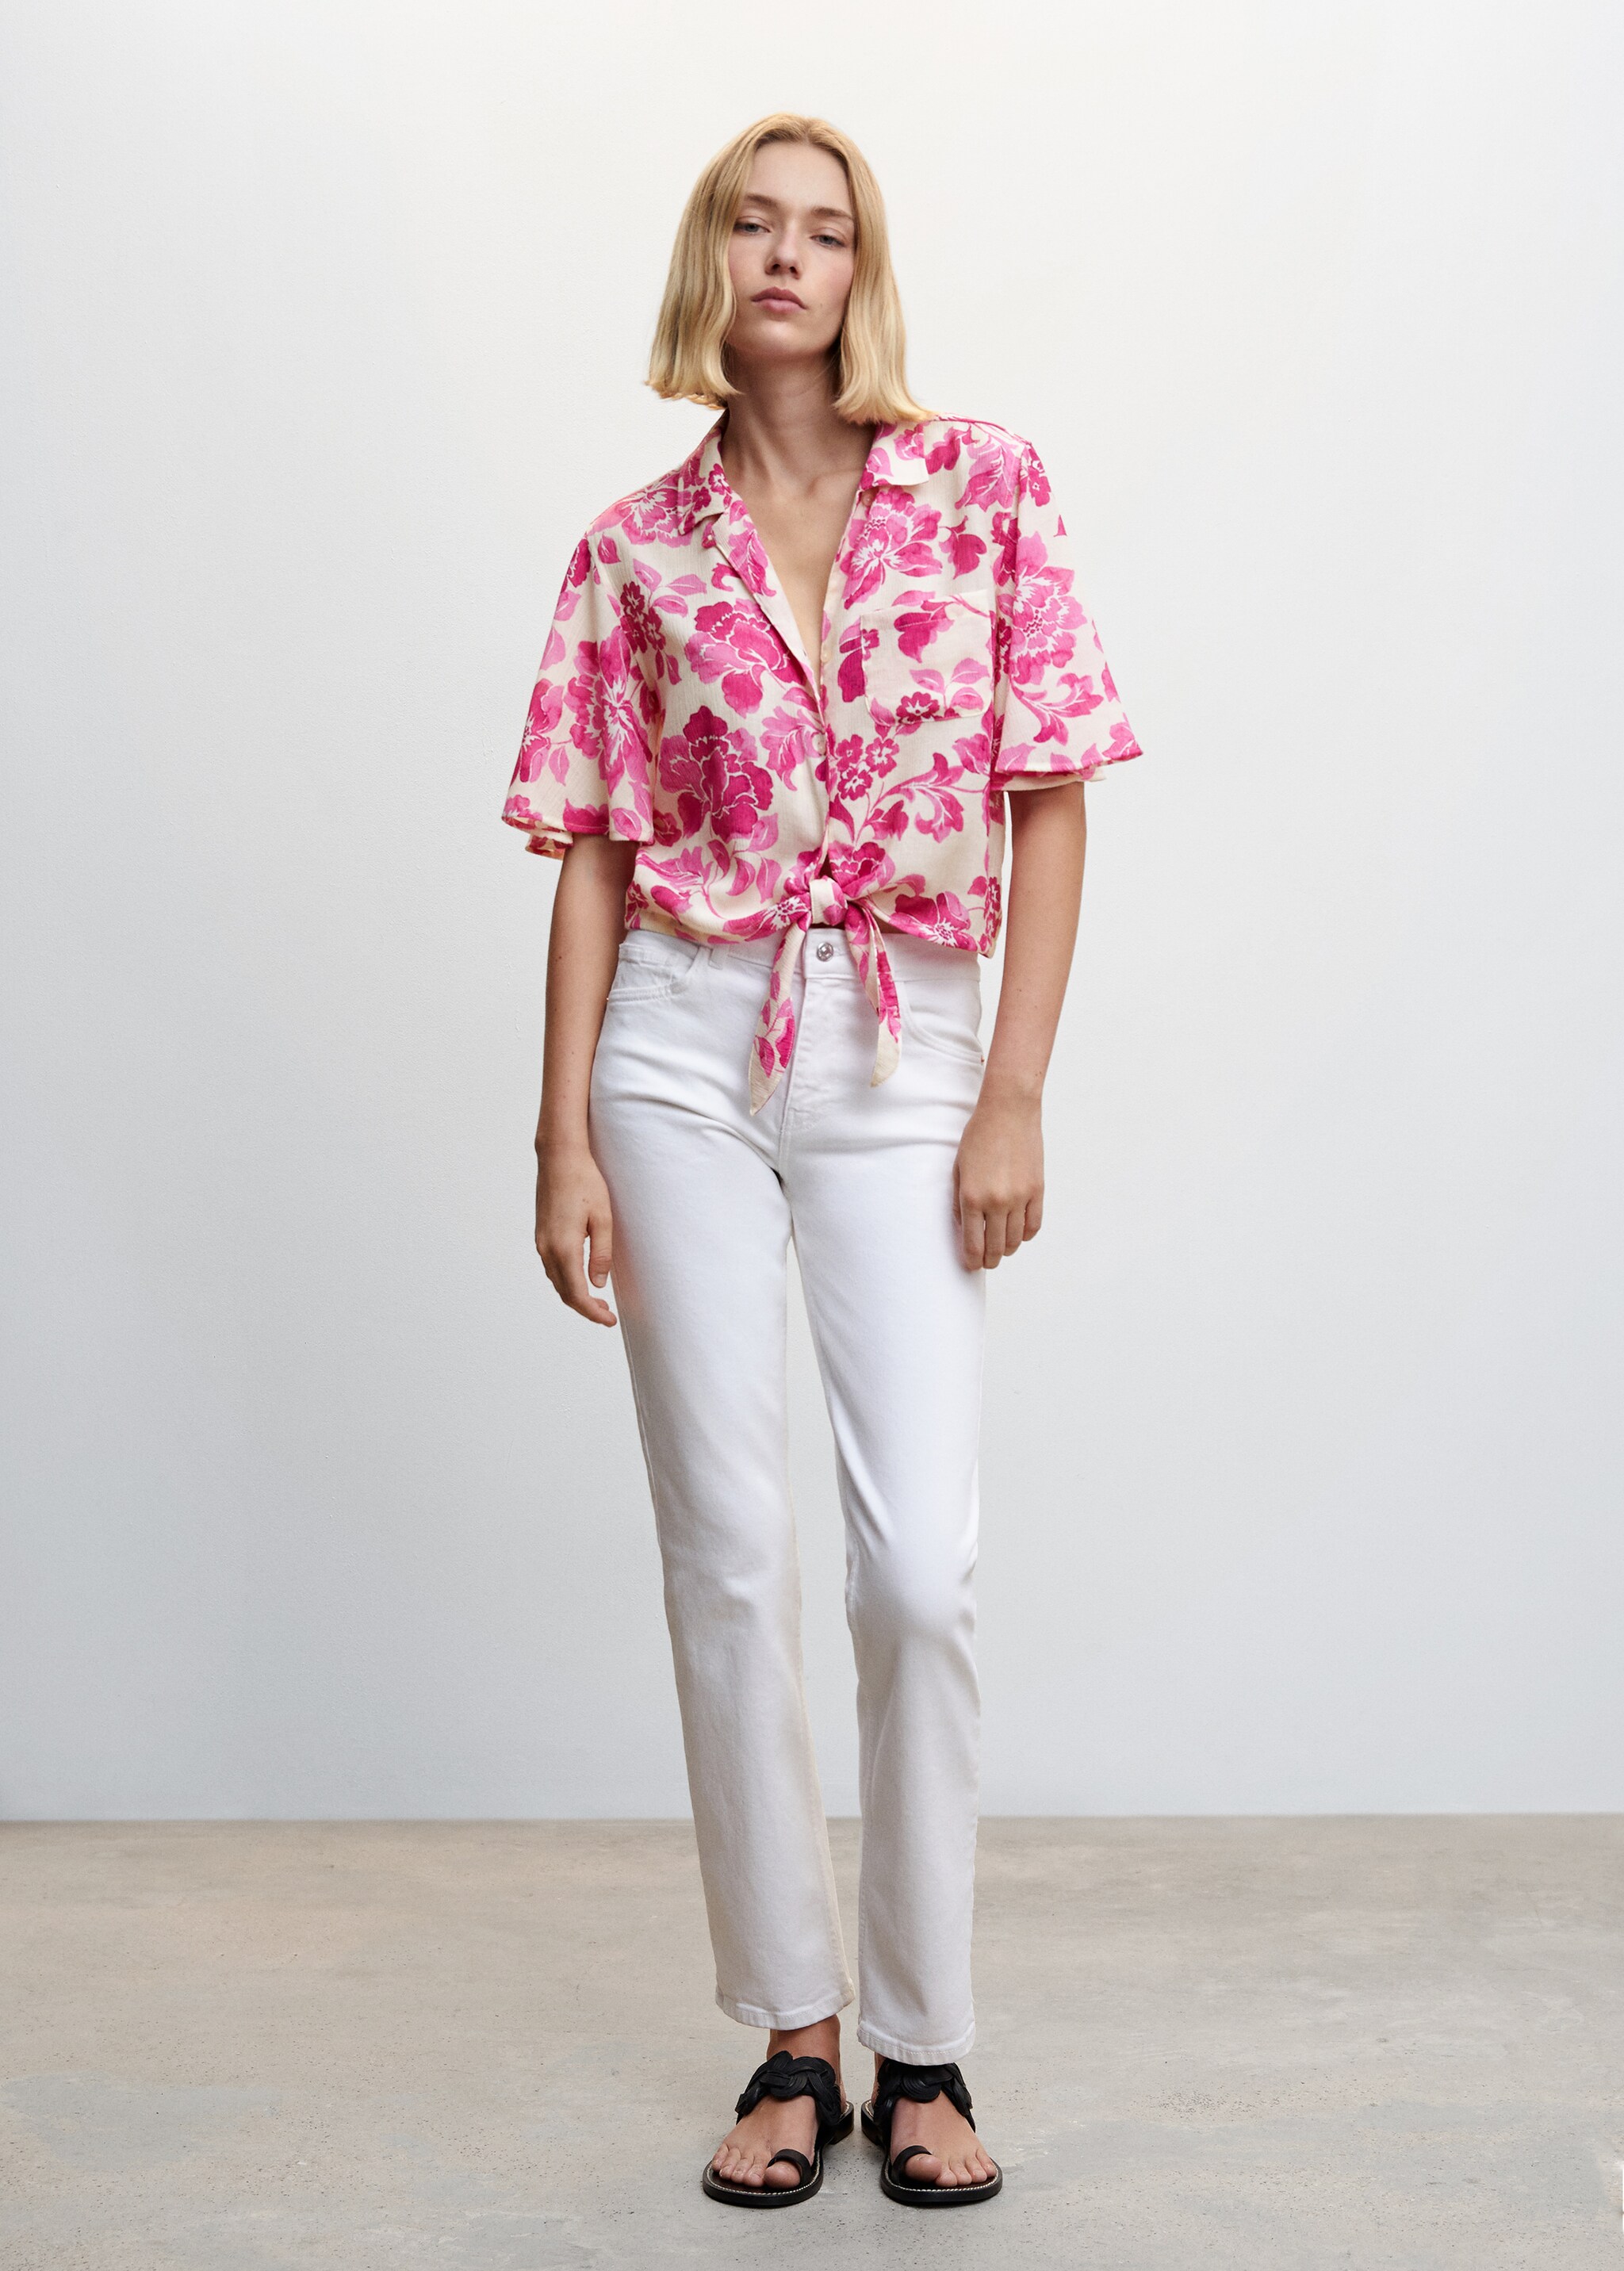 Floral shirt with knot - General plane